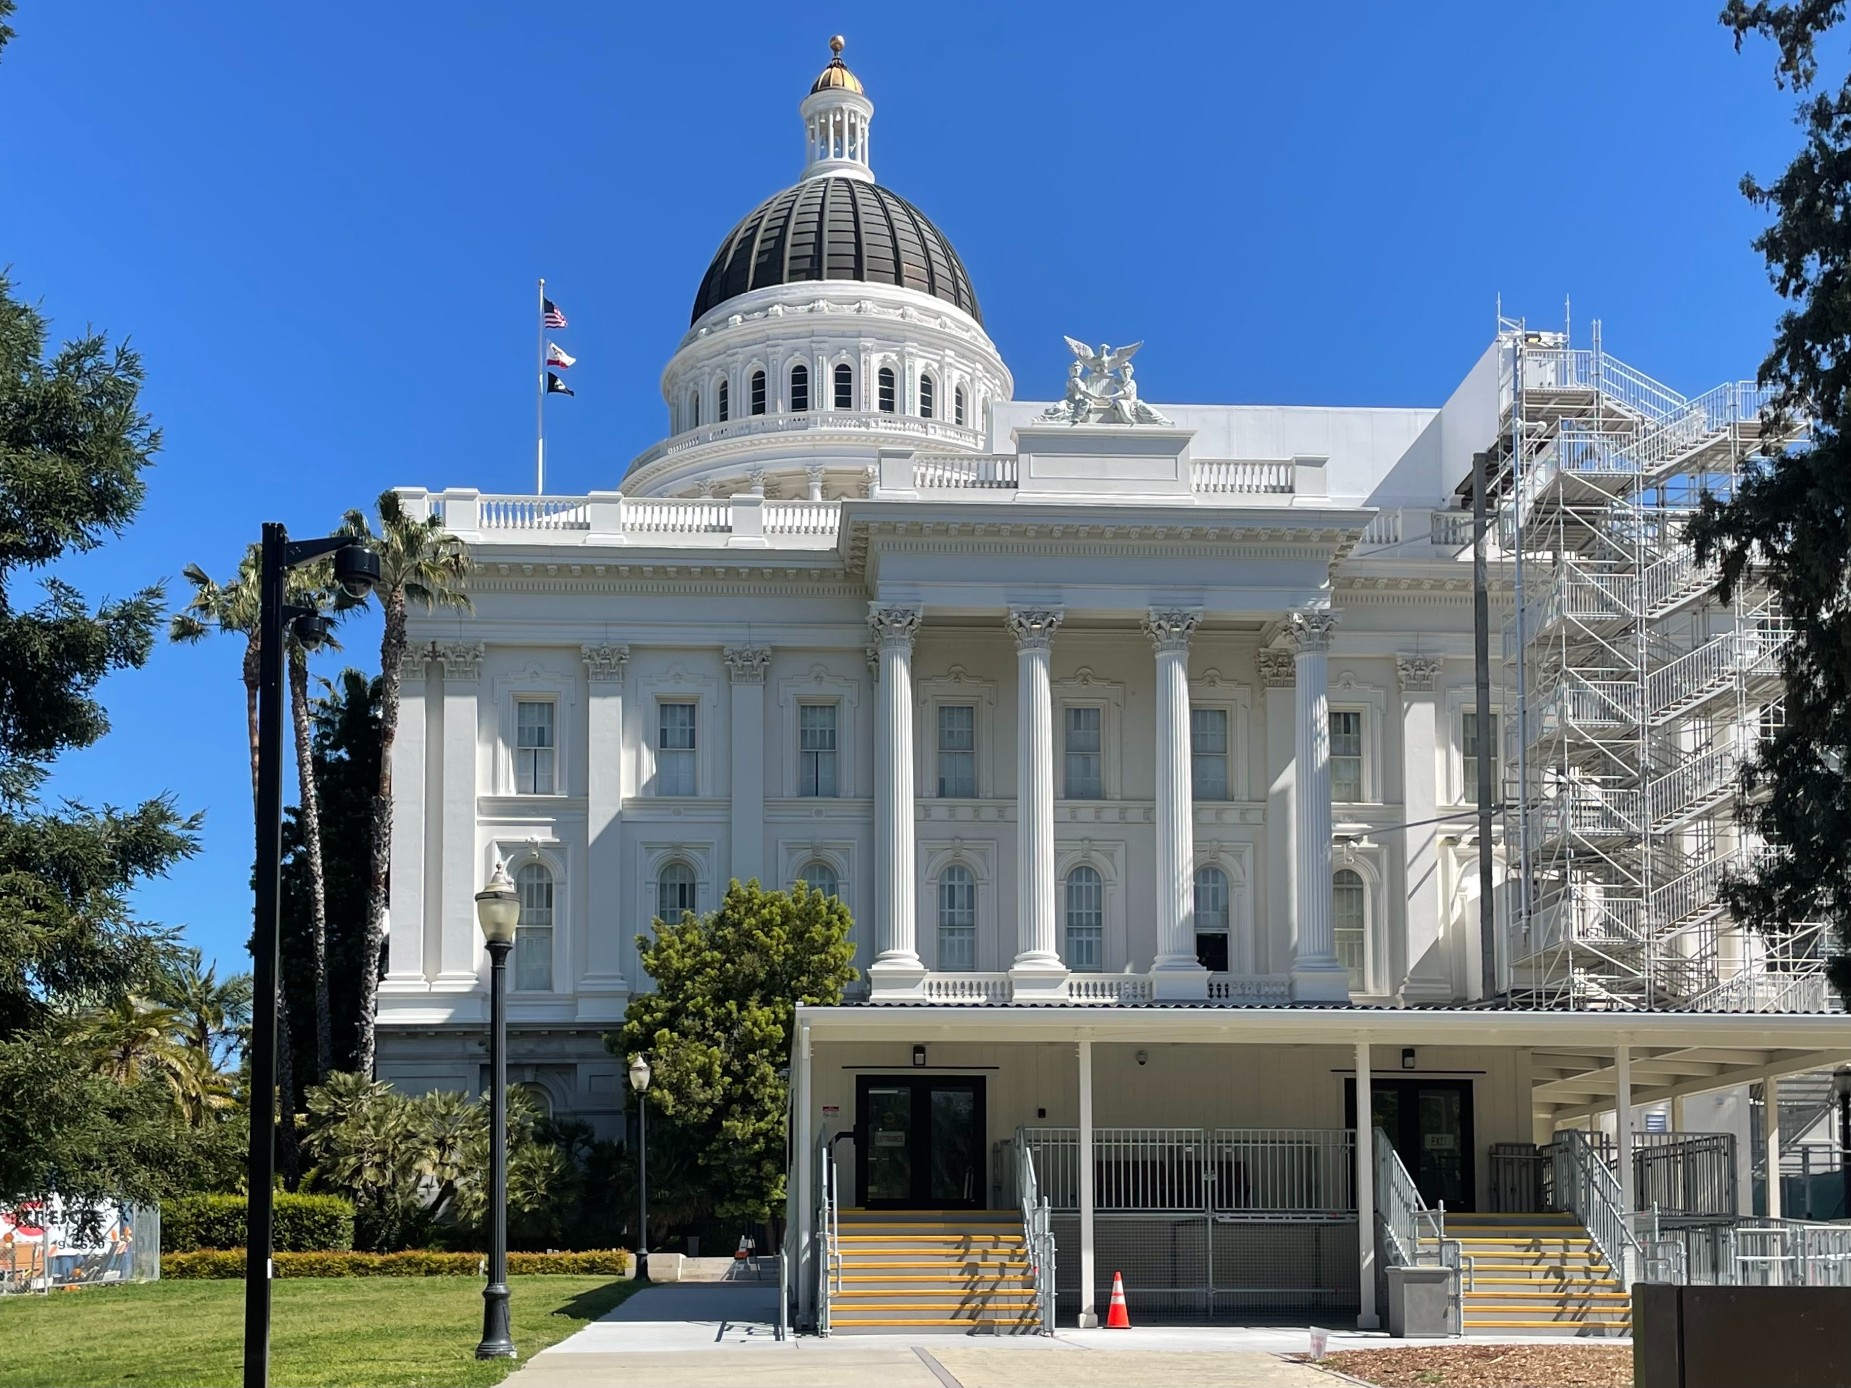 Why State Legislative Staff Want to Unionize FDA Approves Over-the-Counter Birth Control Pill Sacramento Seminar on Neurodevelopmental Disorders image